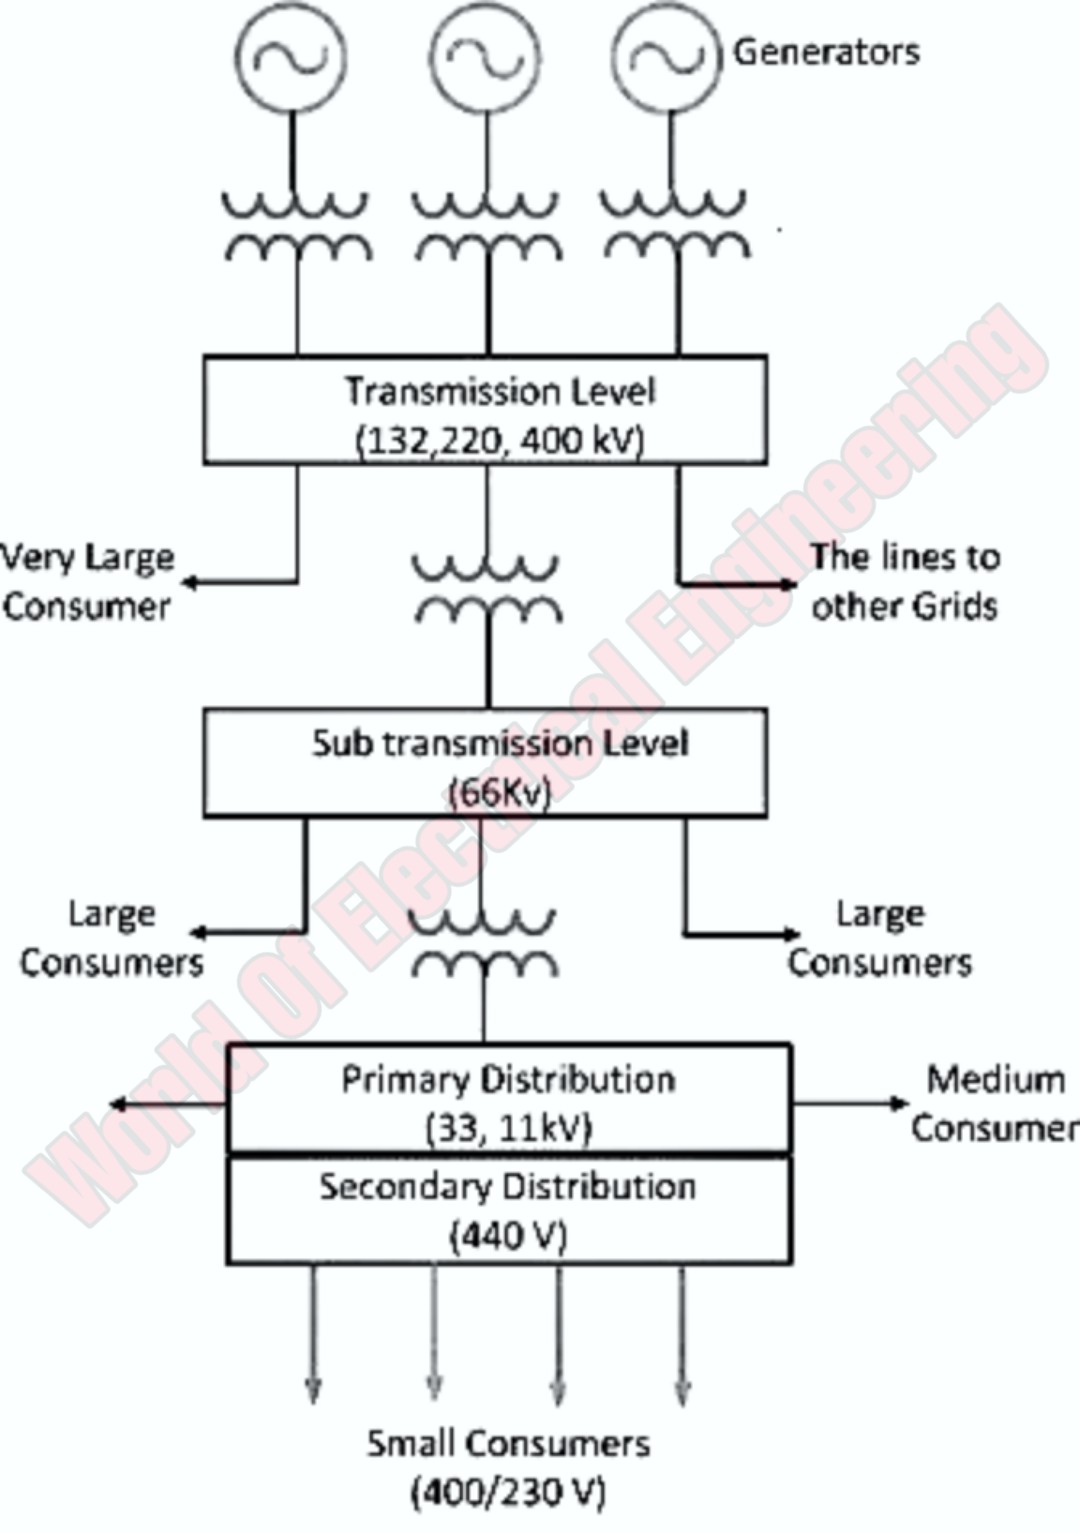 Basic Elements of Power System | Electrical Power System Theory